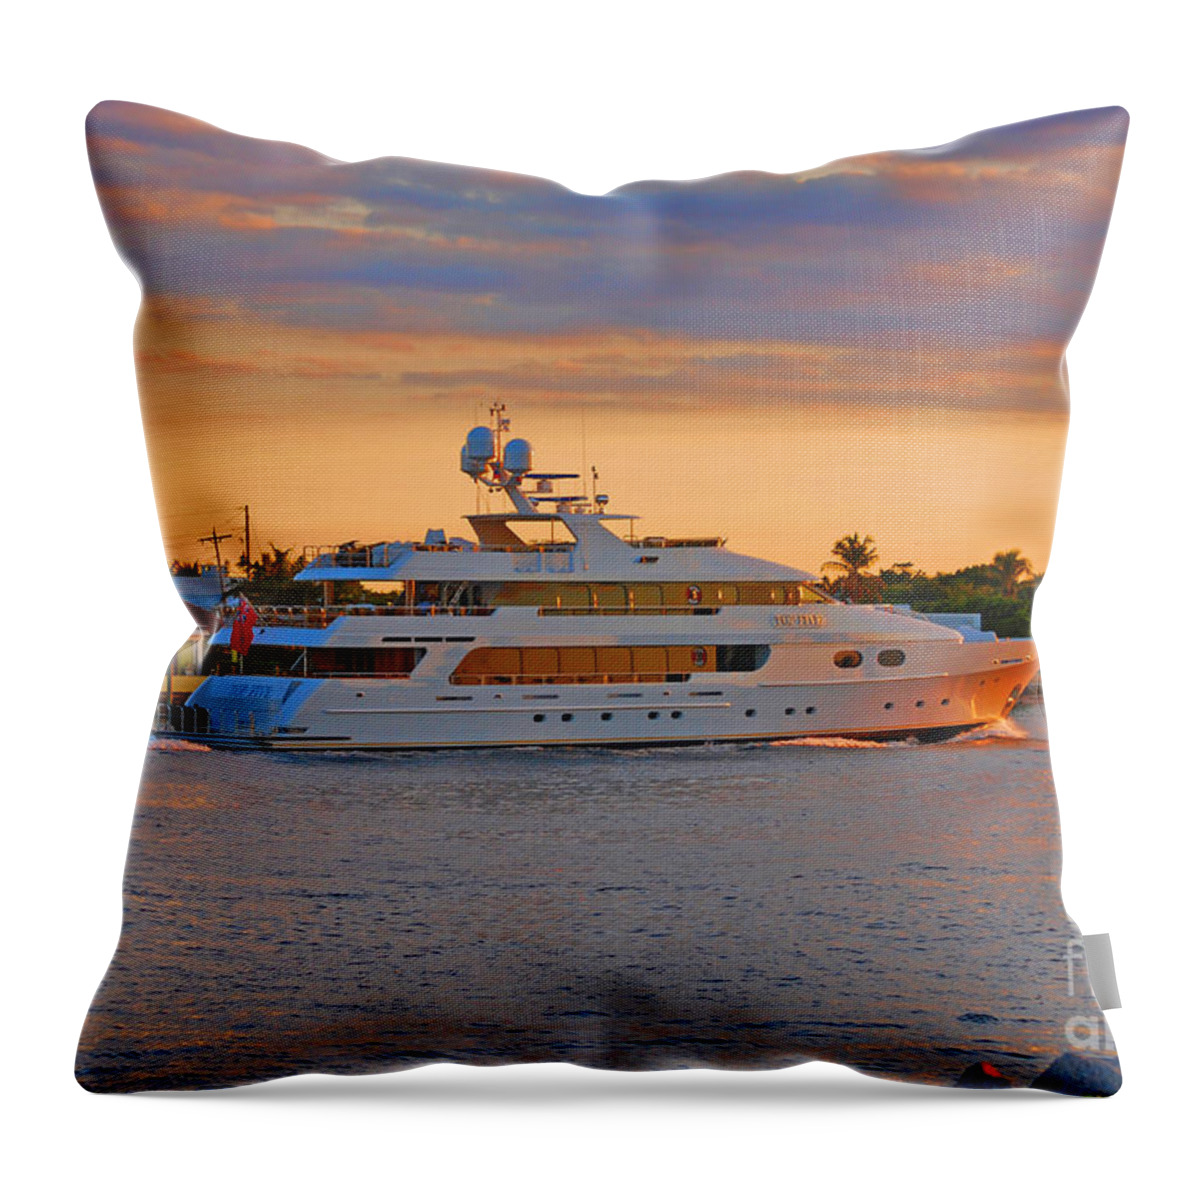 Top Five Throw Pillow featuring the photograph 22- Sunset Cruise by Joseph Keane